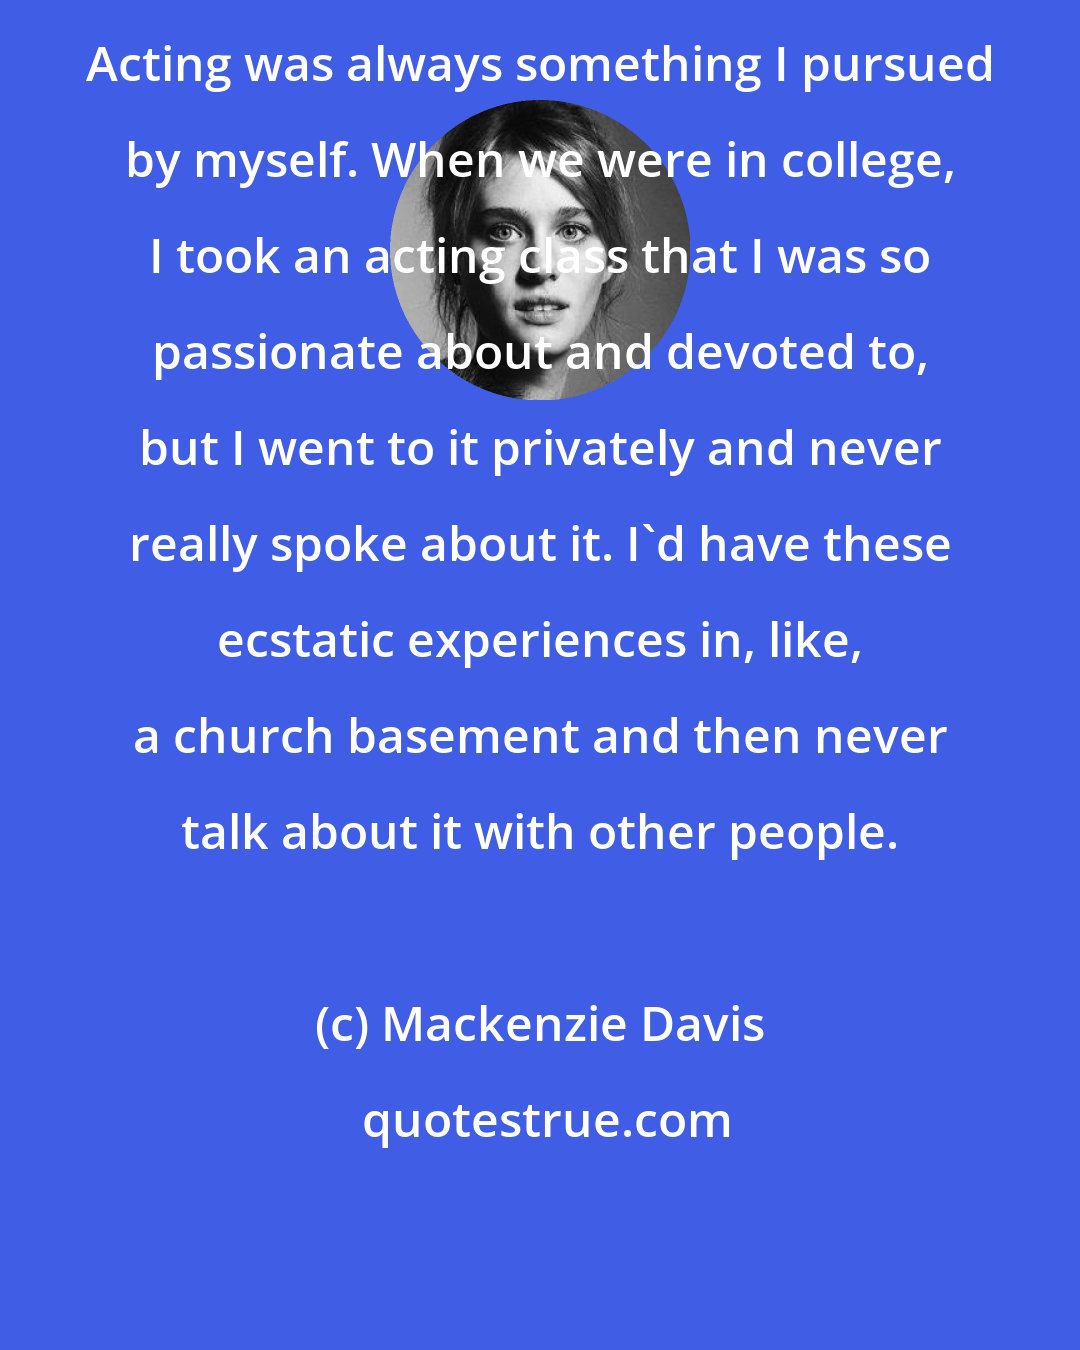 Mackenzie Davis: Acting was always something I pursued by myself. When we were in college, I took an acting class that I was so passionate about and devoted to, but I went to it privately and never really spoke about it. I'd have these ecstatic experiences in, like, a church basement and then never talk about it with other people.